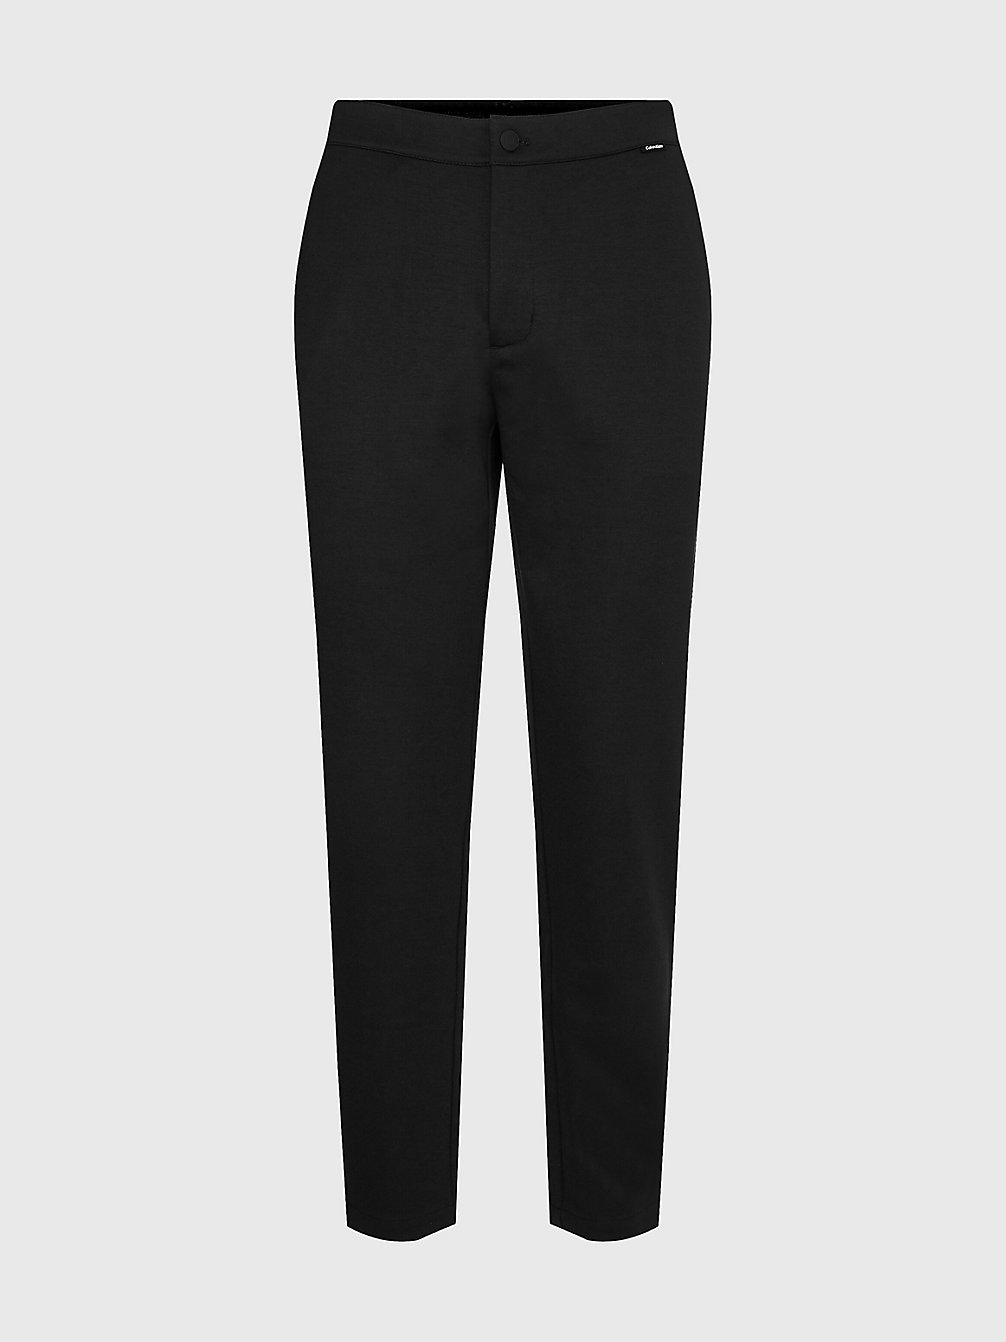 CK BLACK Plus Size Tapered Trousers undefined men Calvin Klein